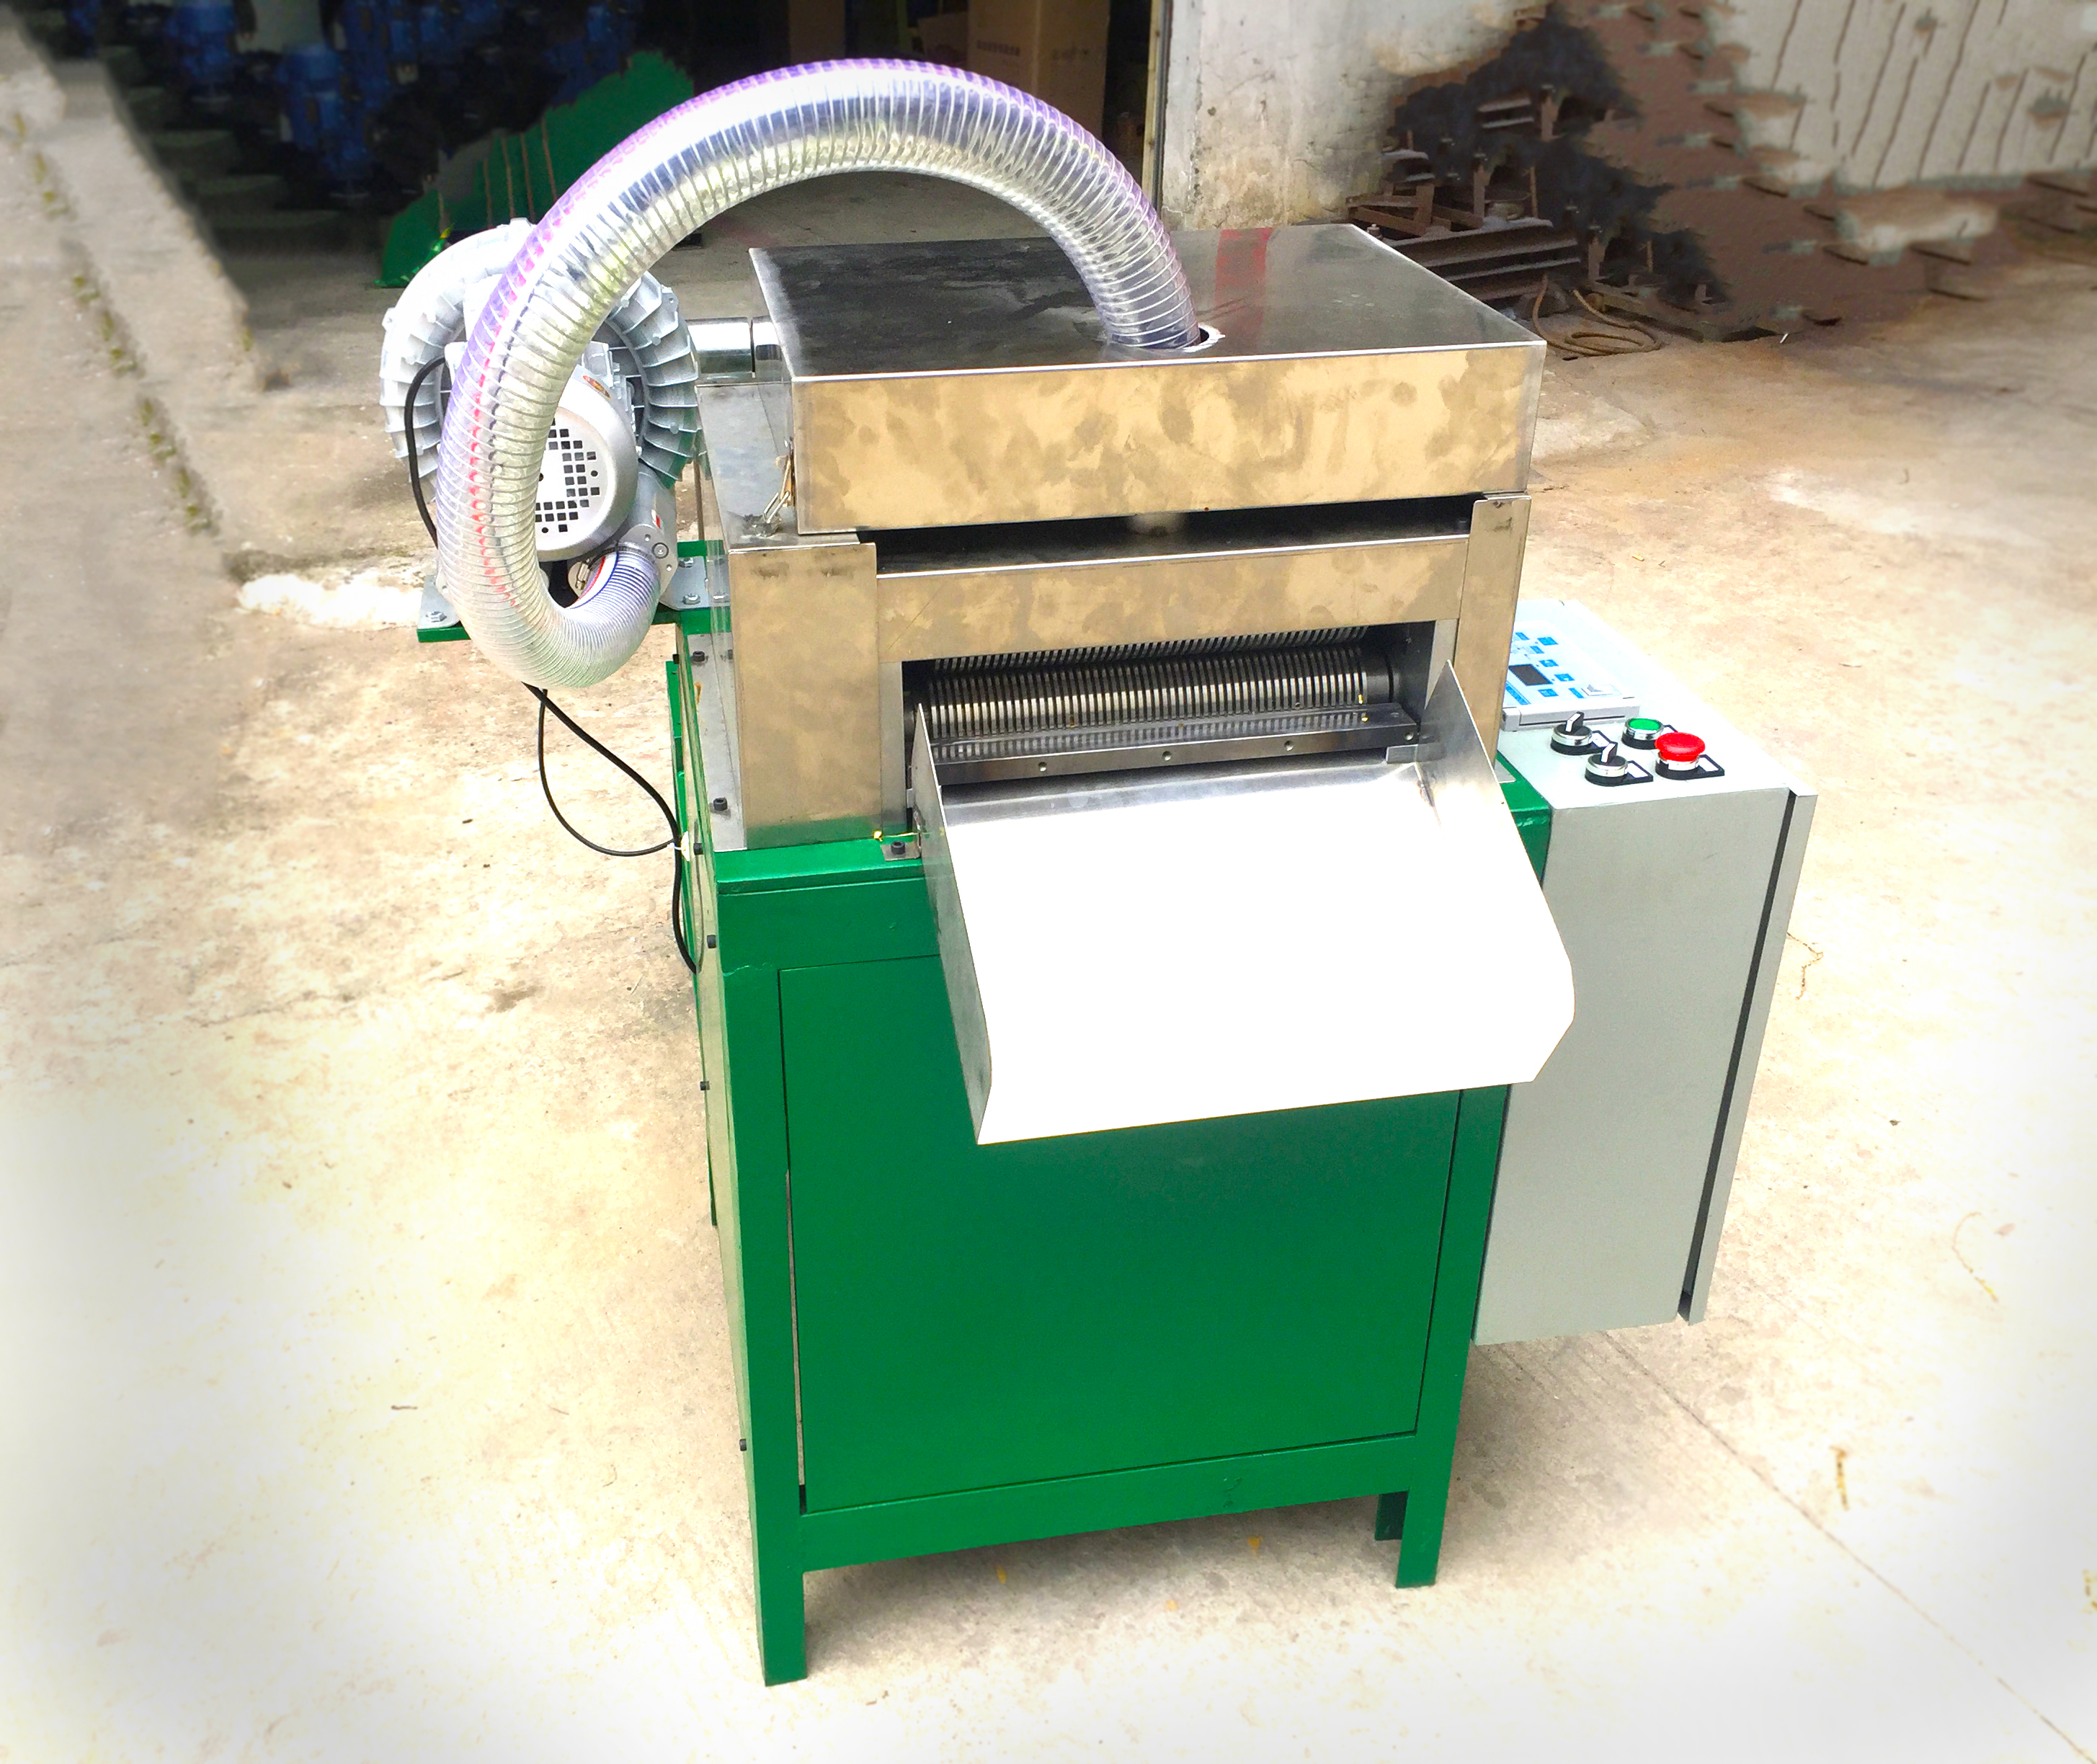 How to make the wire arranging machine mold?